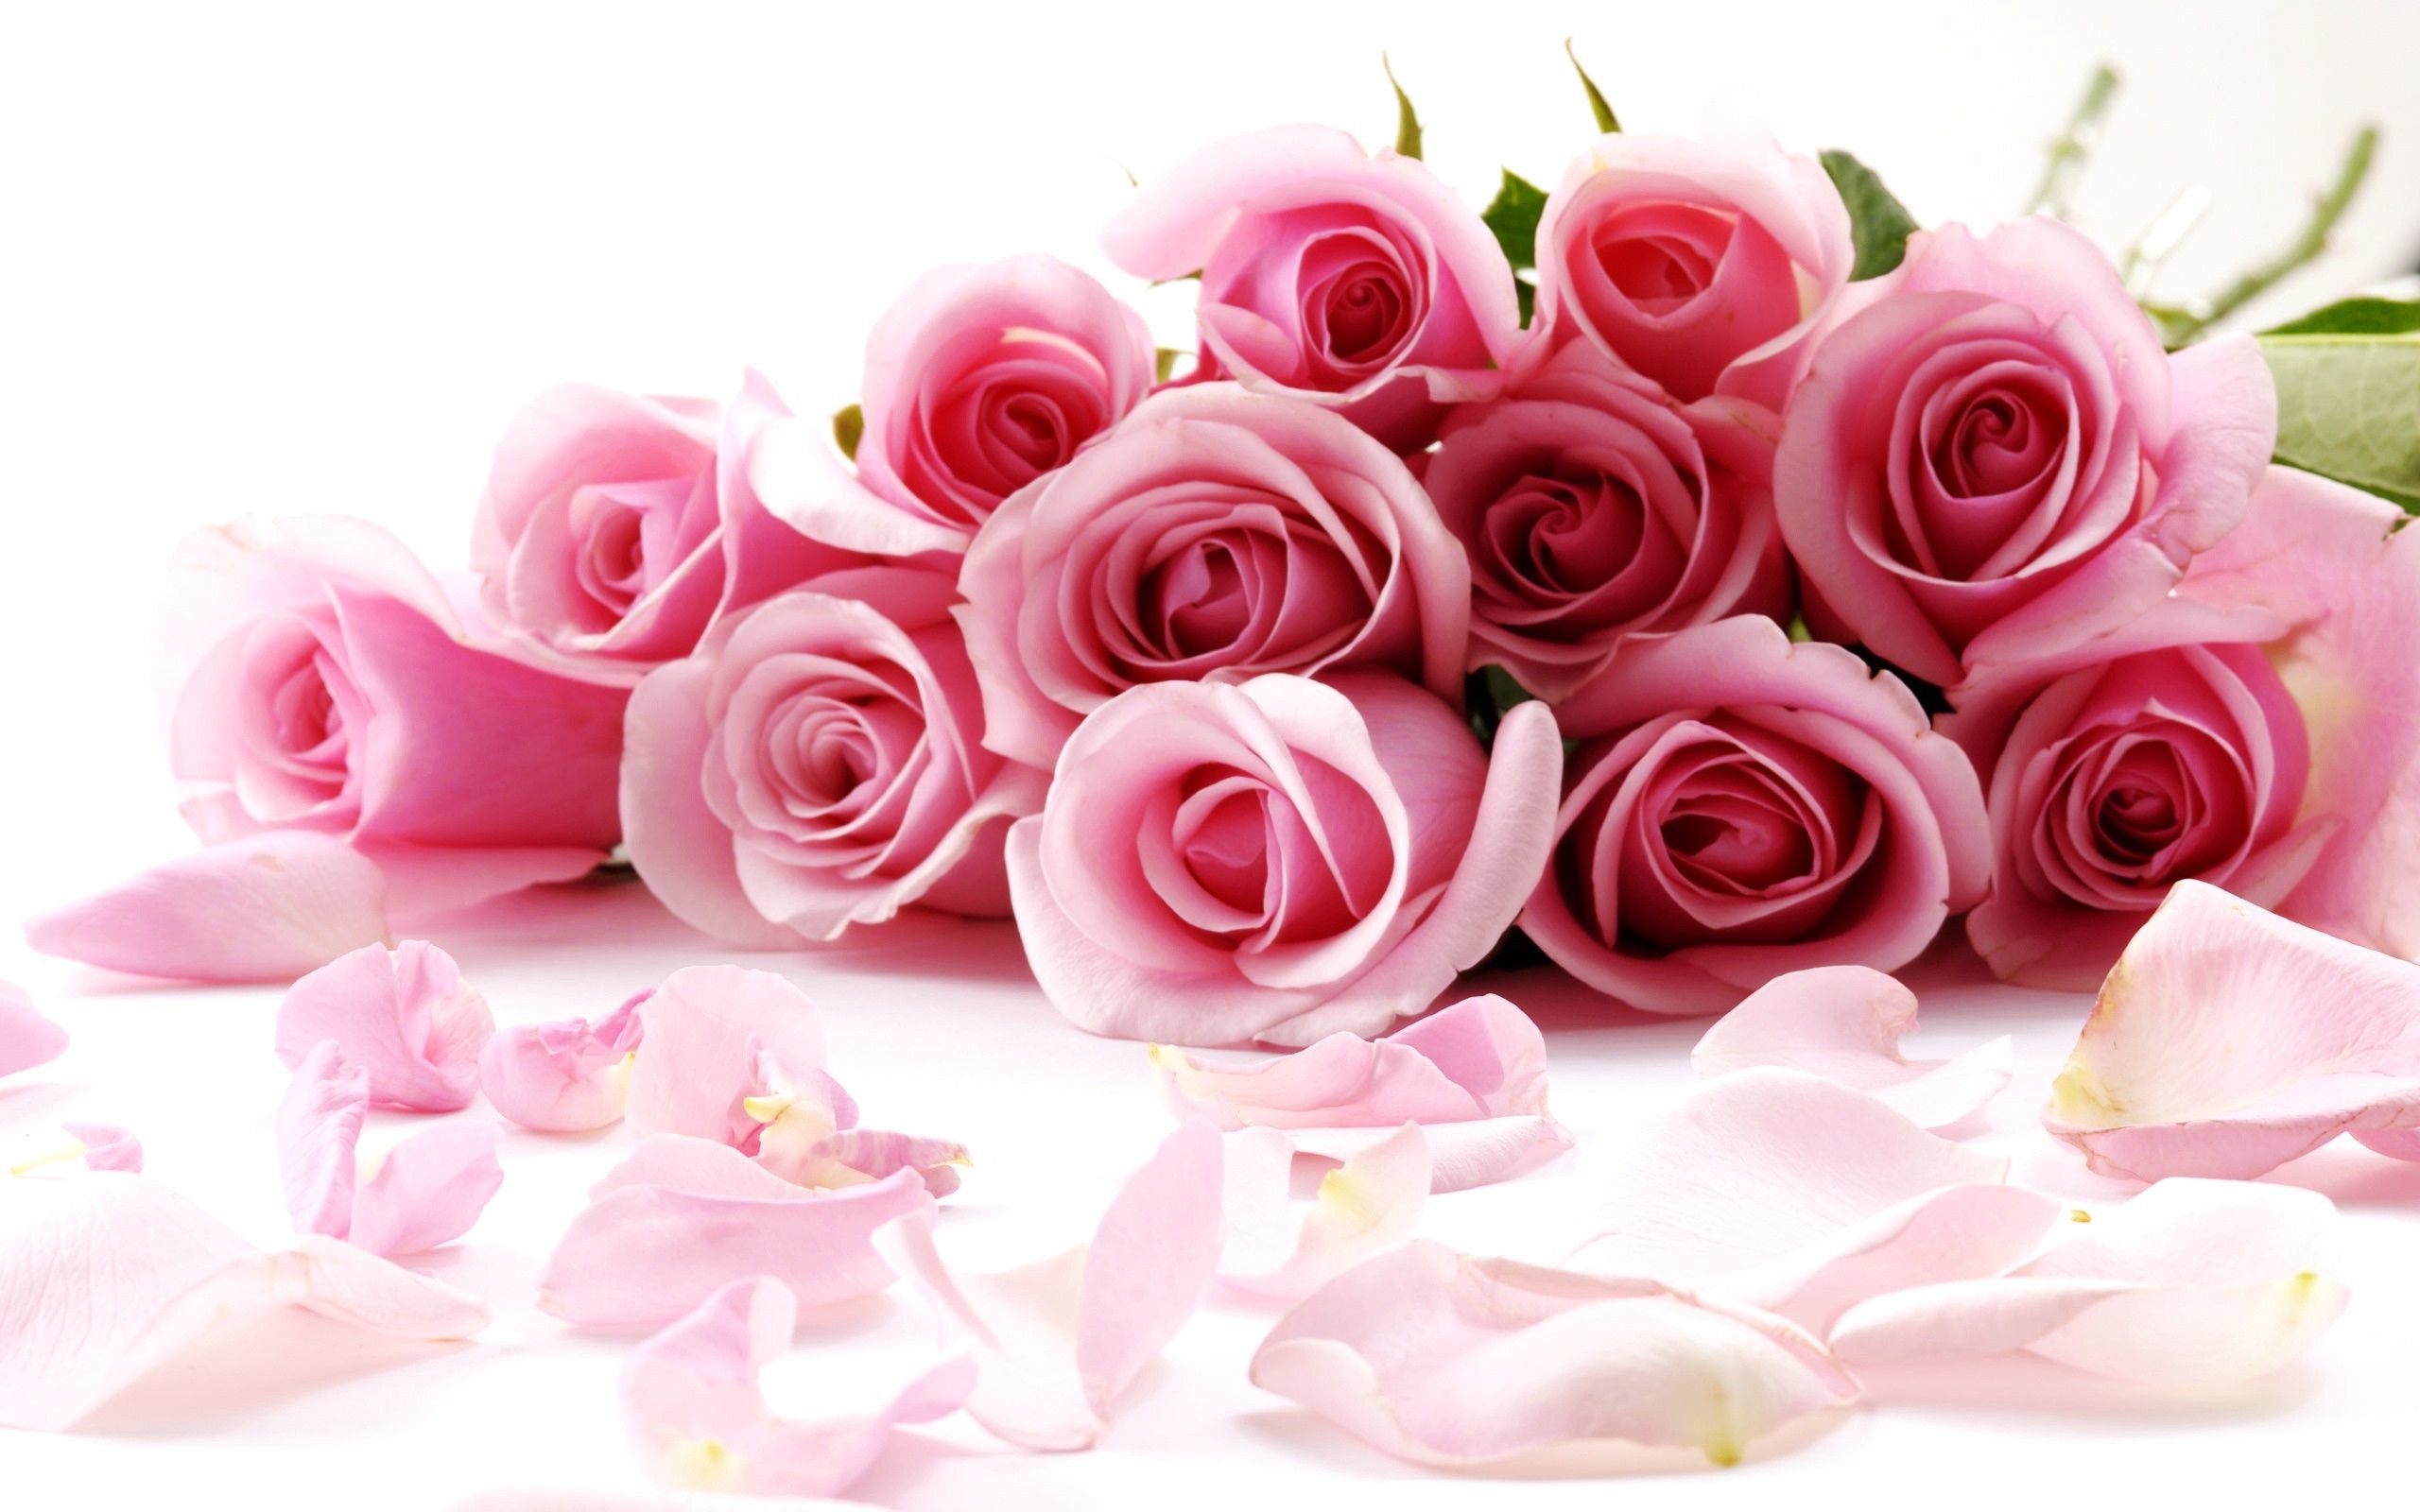 2560x1600 rose images photos wallpapers rose red flower wallpaper